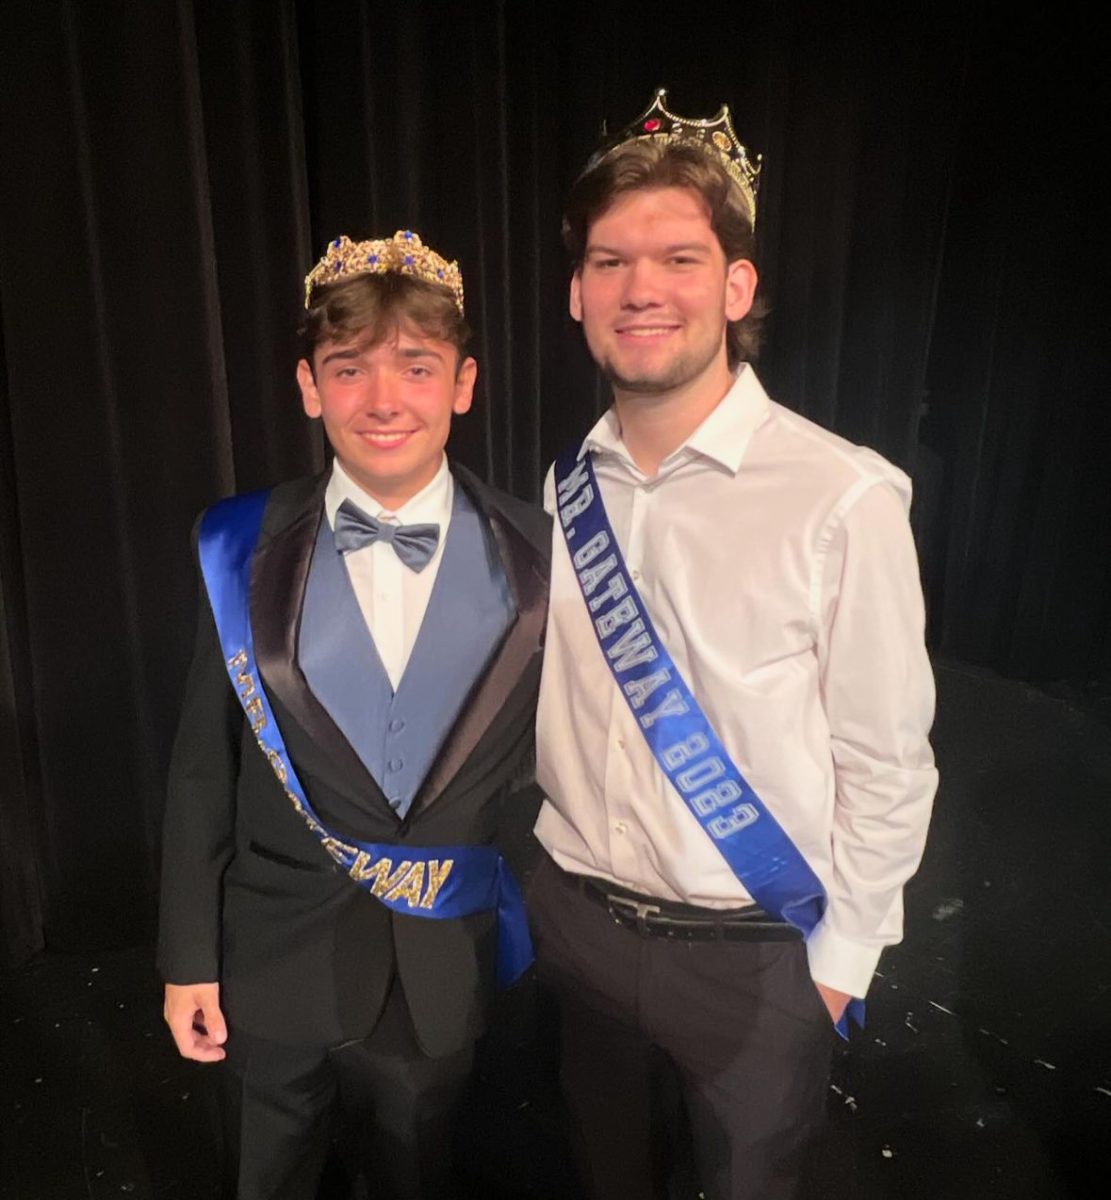 Last years winner Jack Colella with this years Mr. Gateway, Cole Tice!